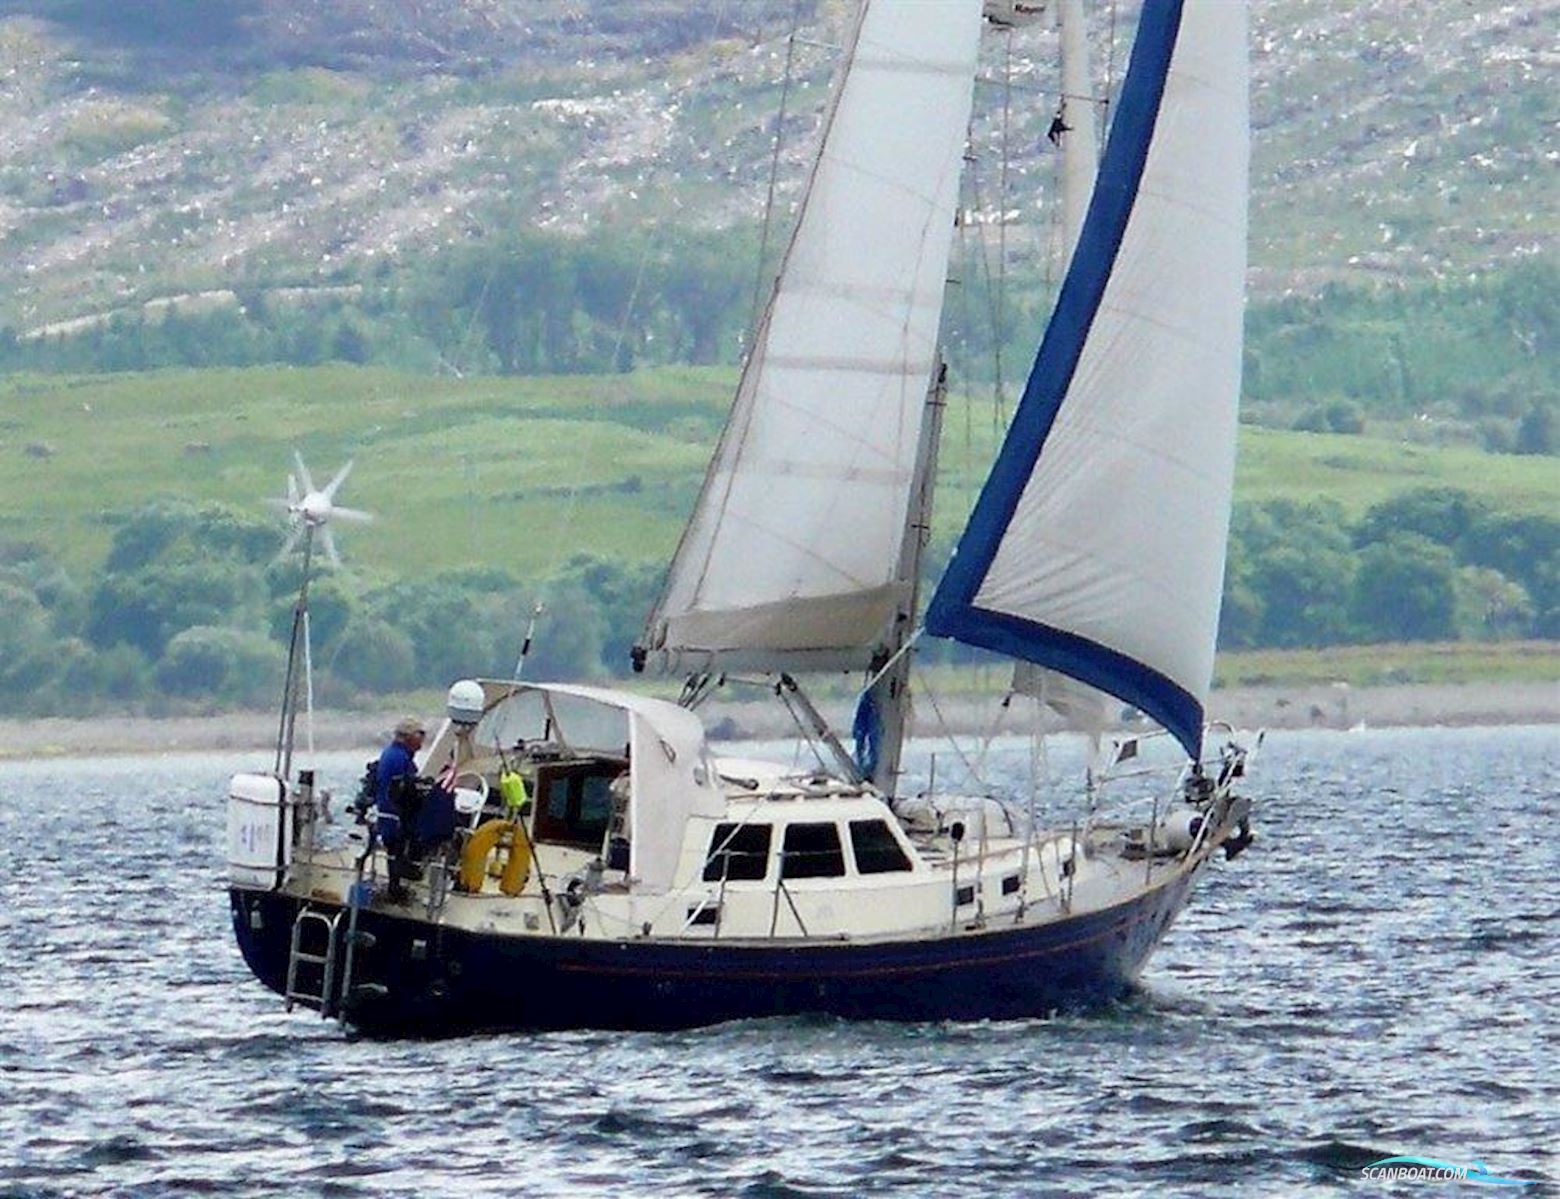 Vancouver 38 Pilot House Sailing boat 1998, with Yanmar 4JH2E engine, United Kingdom